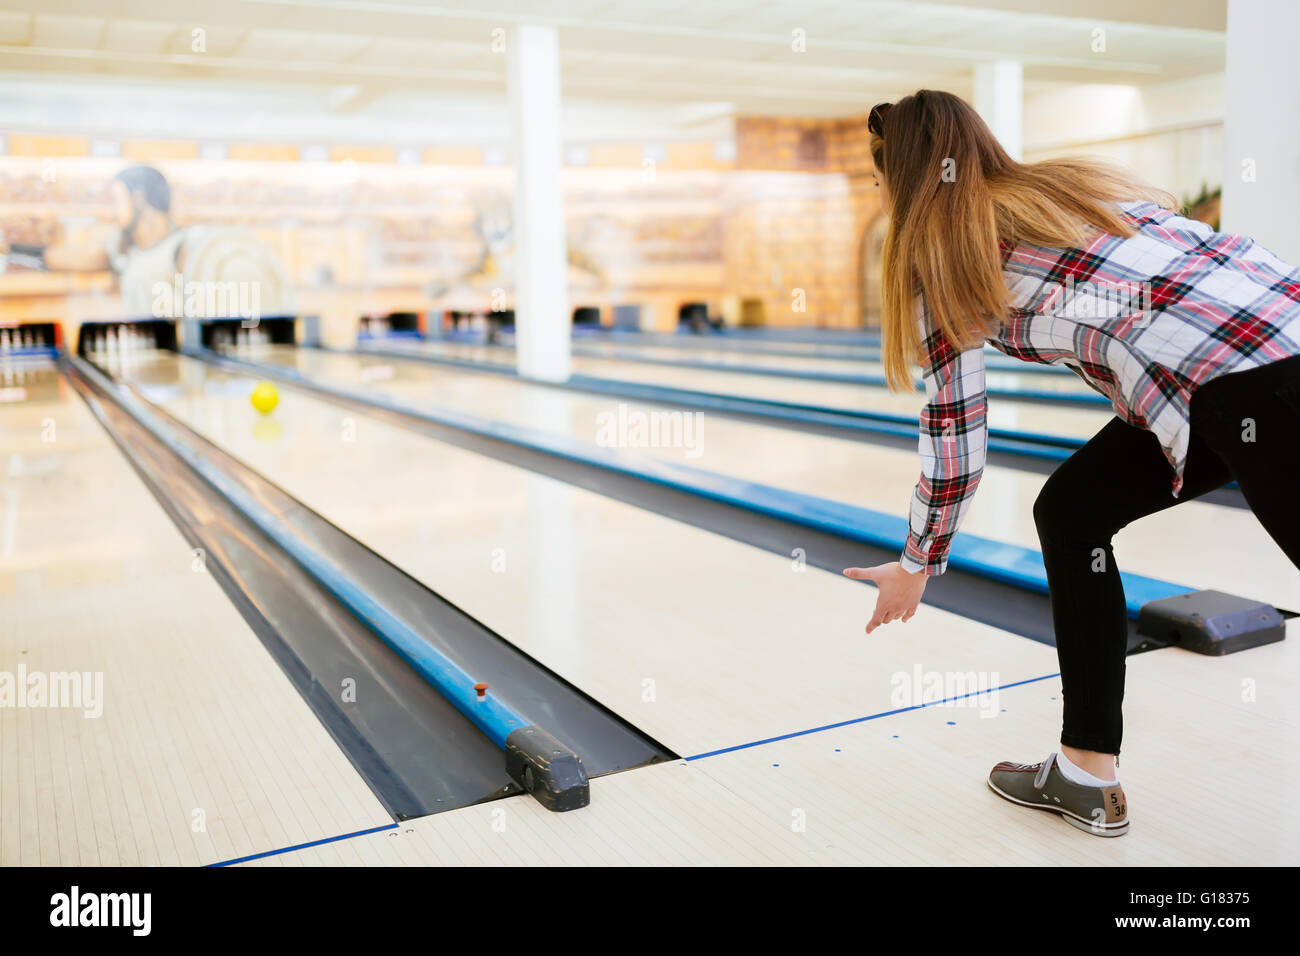 Woman throwing bowling ball en club Banque D'Images